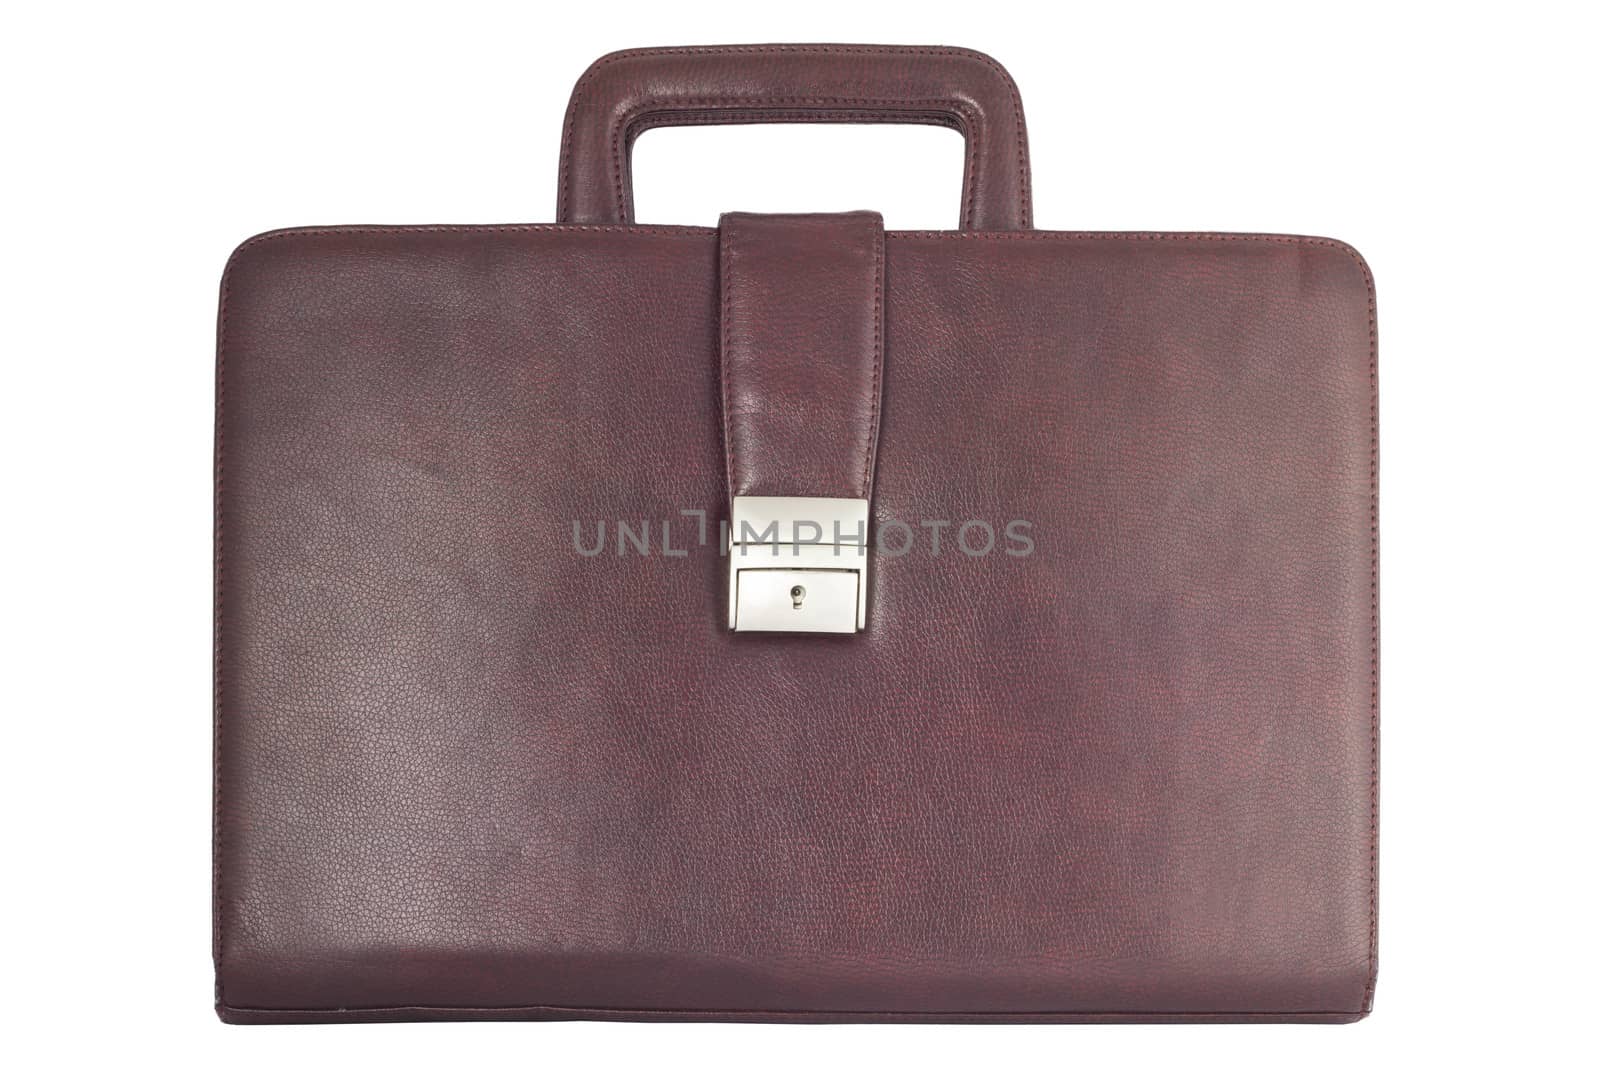 Photo business folder with handles. Leather folder with metal clasp